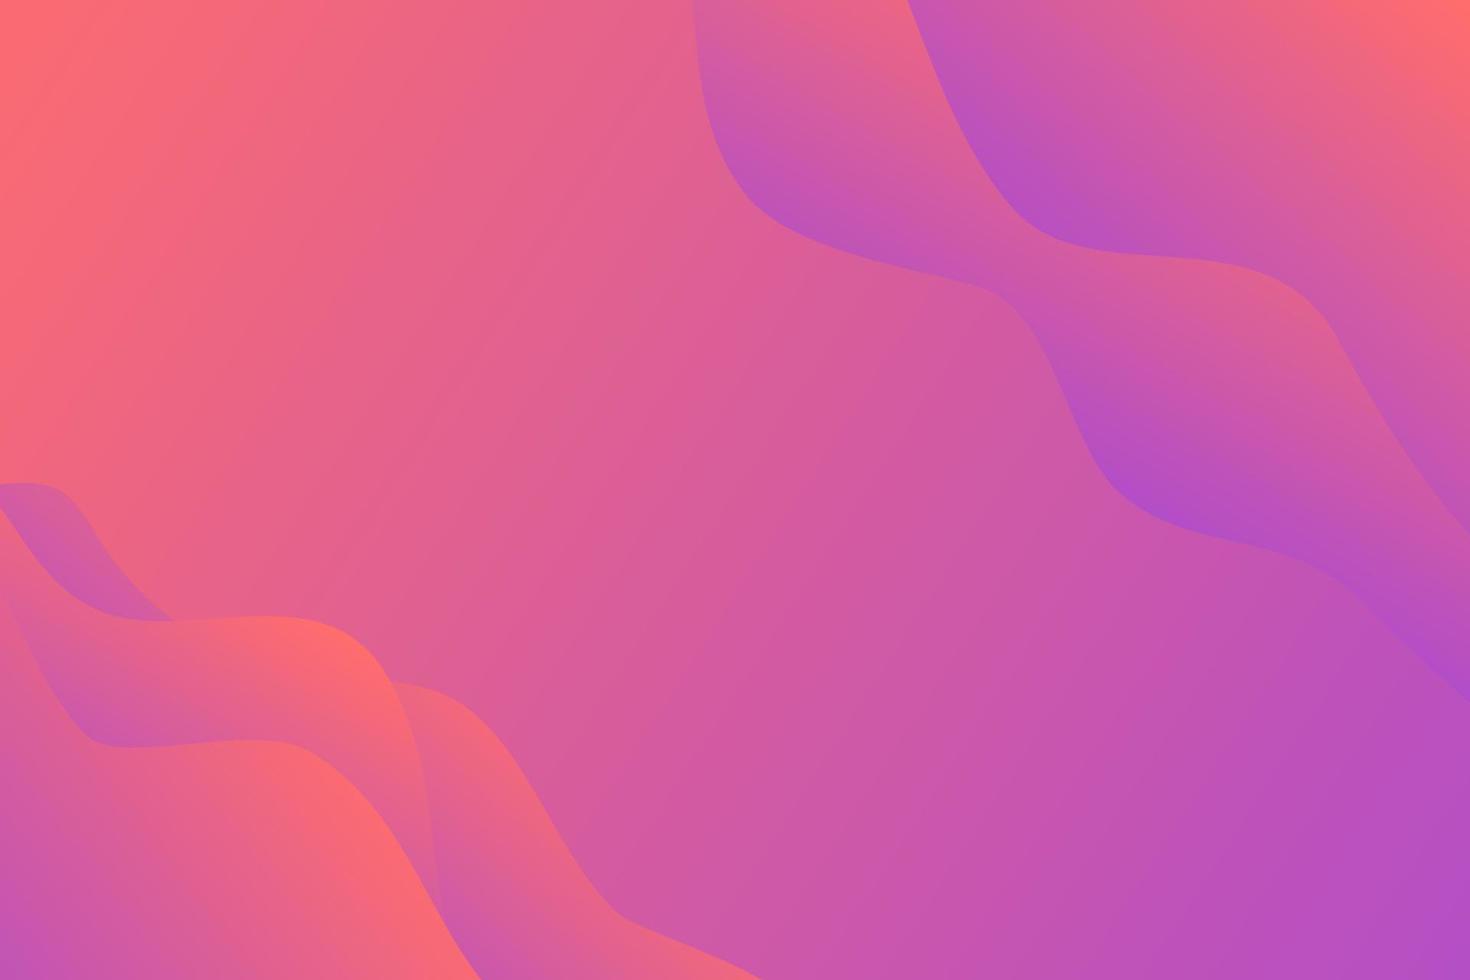 Wave gradient pink and purple abstract background vector design